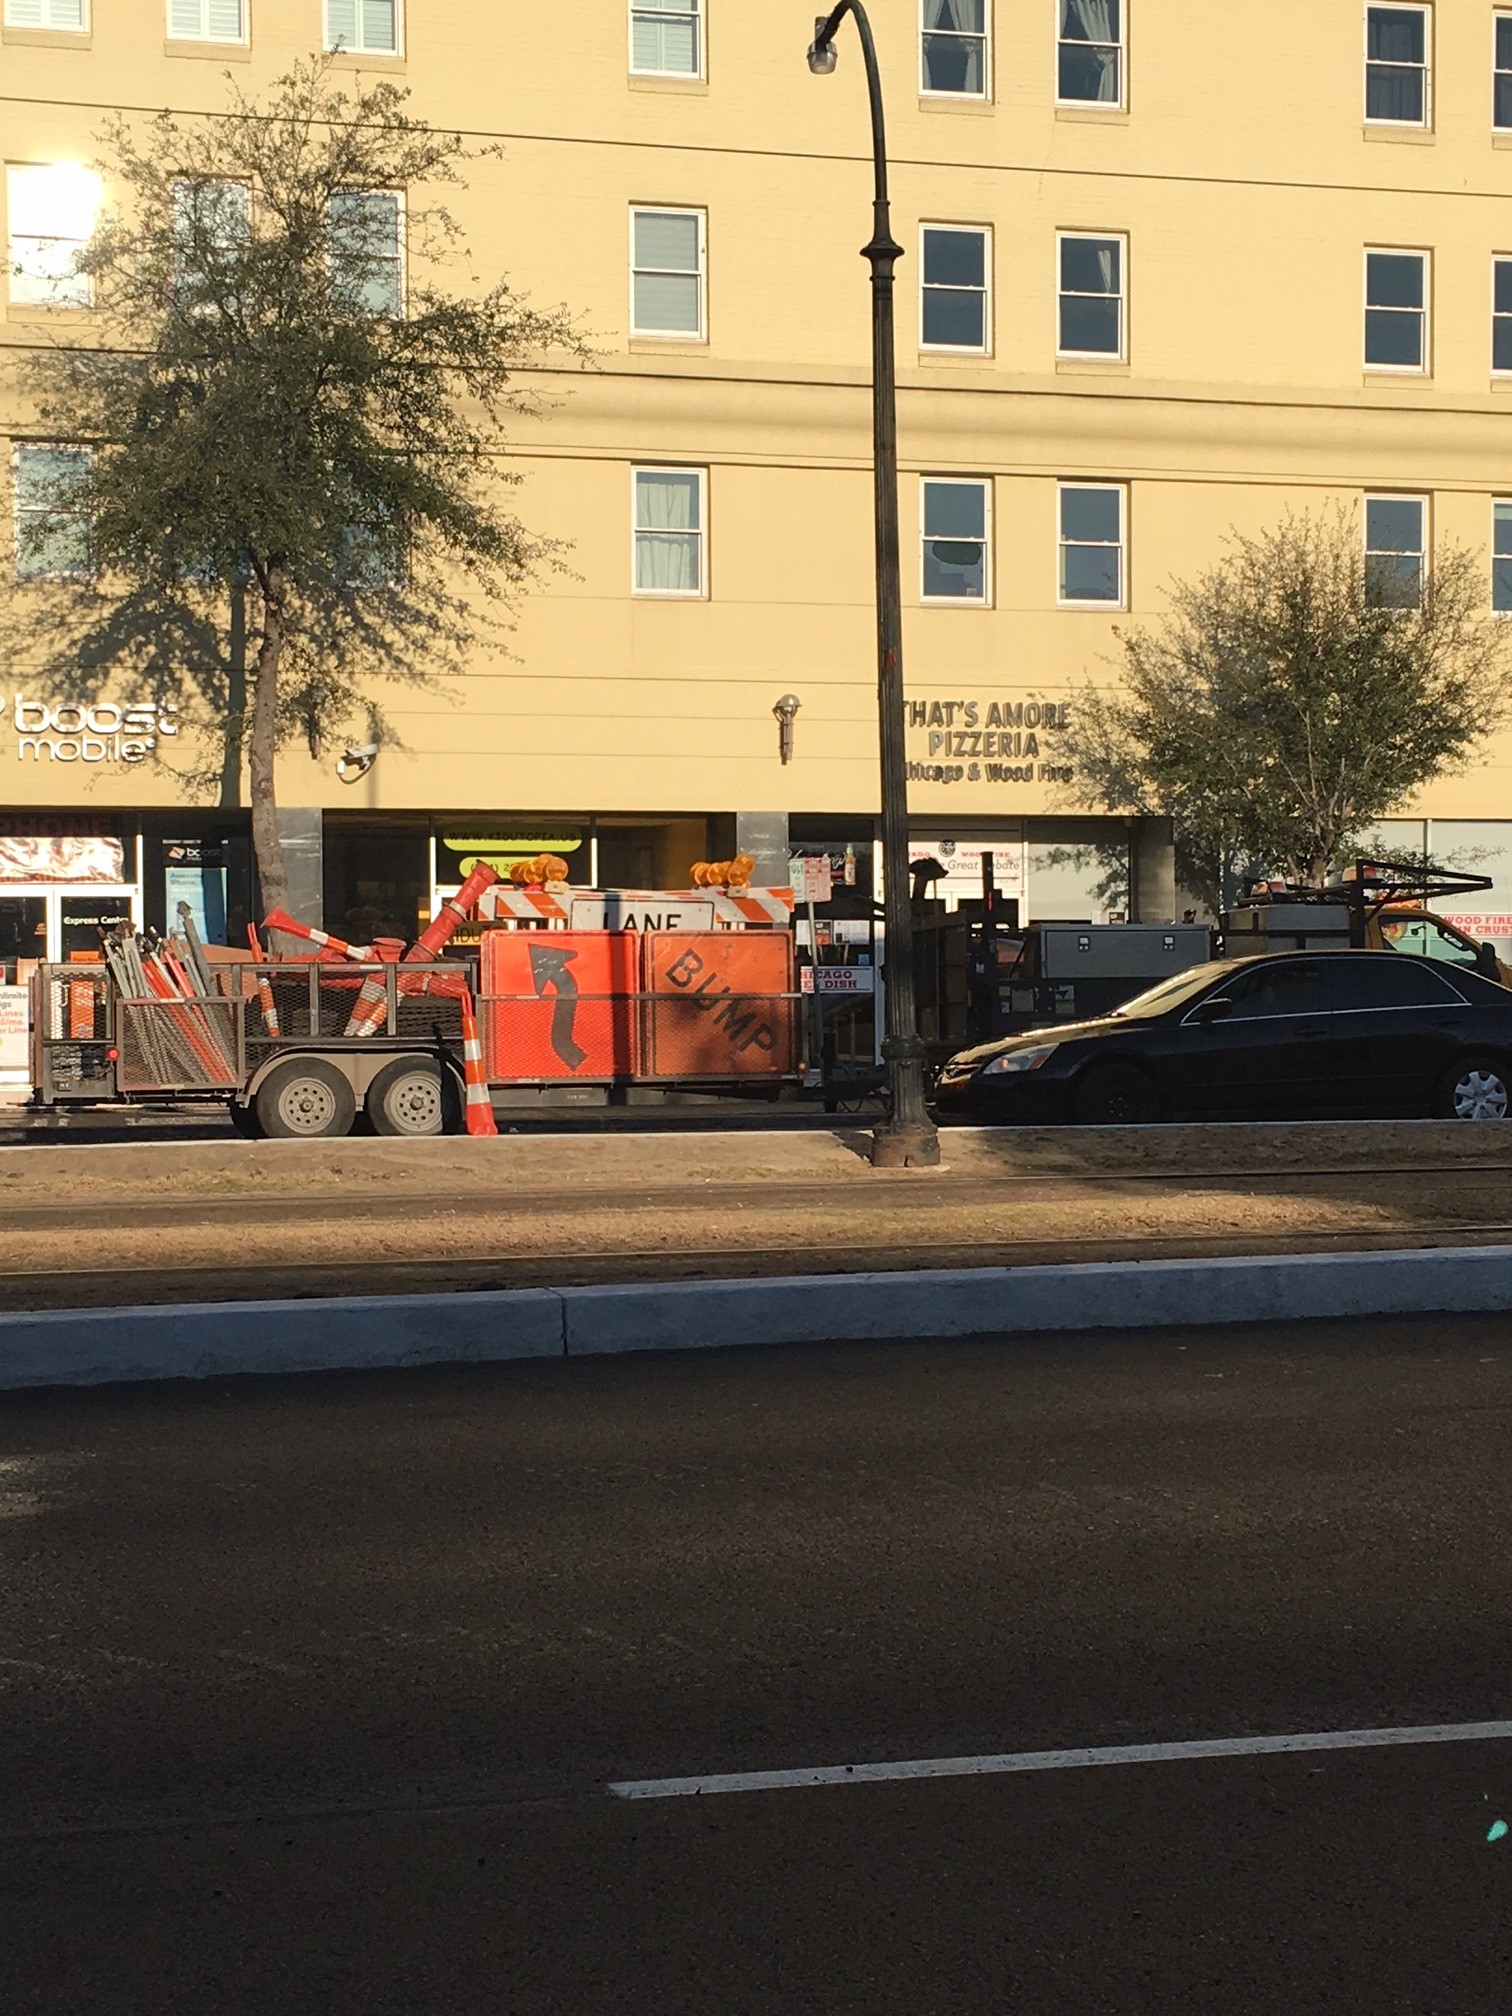 ST. CHARLES AVENUE CONSTRUCTION RE-MOBILIZED IMMEDIATELY AFTER MARDI GRAS